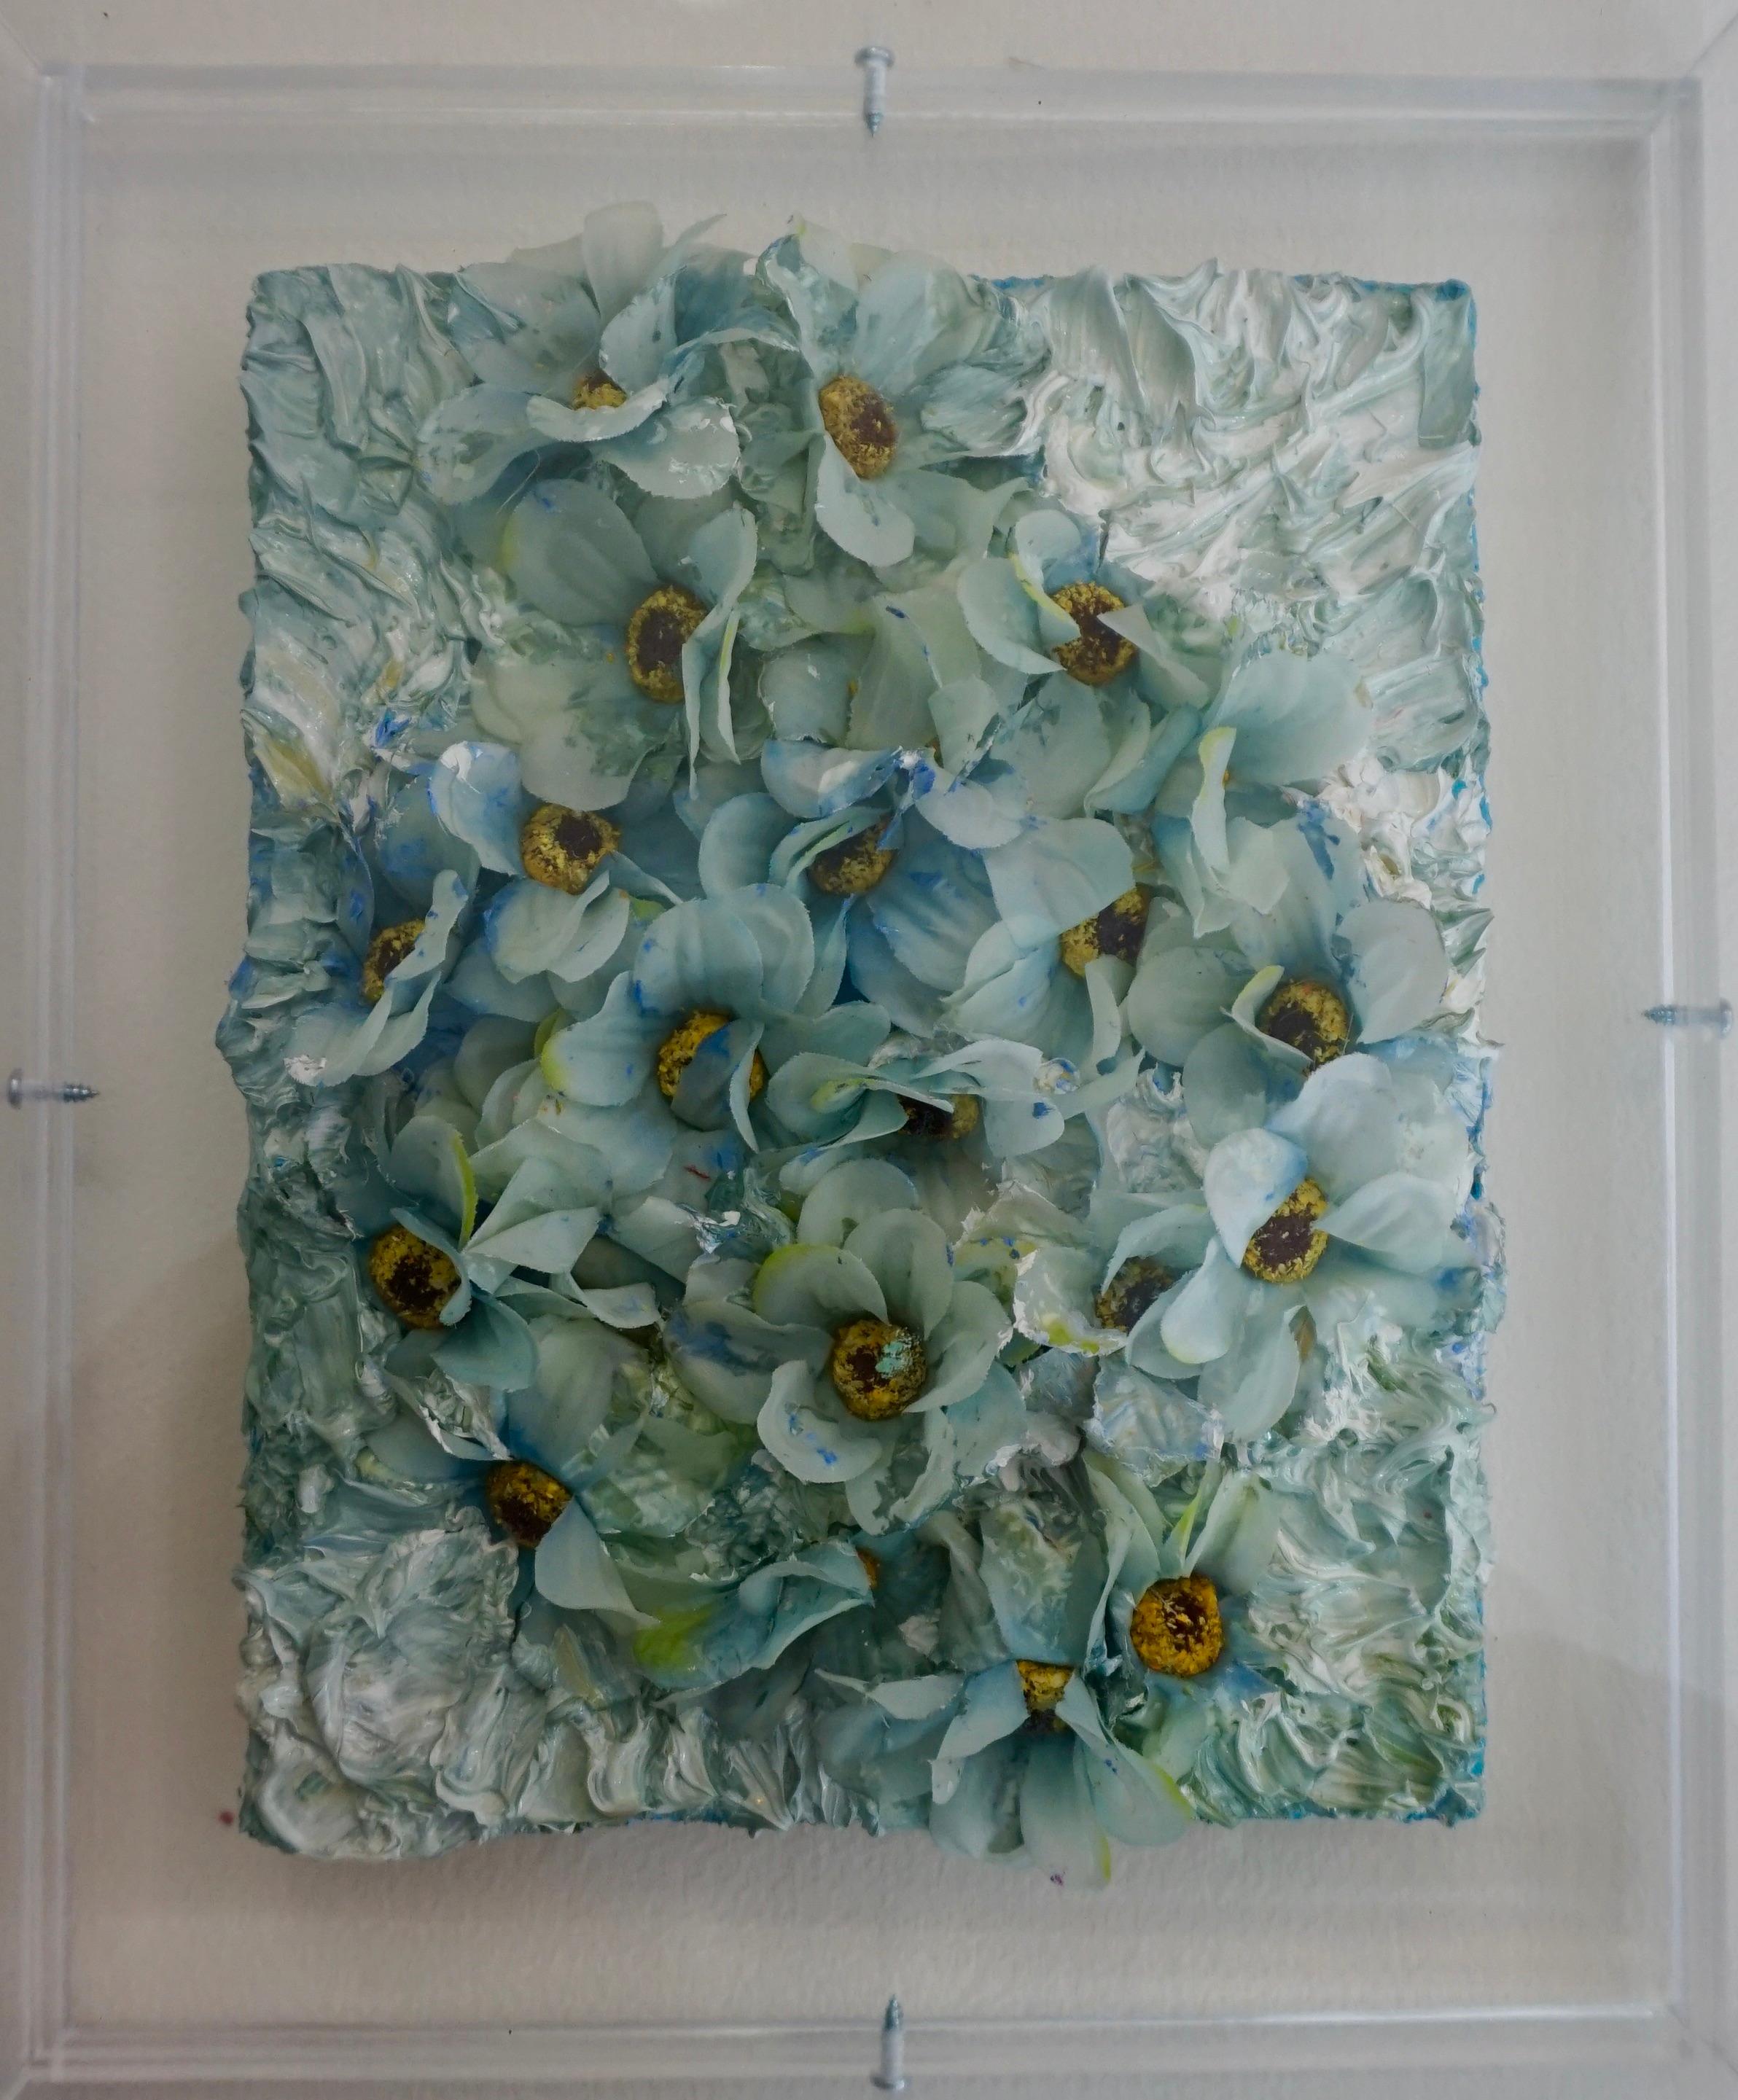 Tactile memory #123. Abstract painting. Silk Flowers, Acrylic, Oil on Canvas - Mixed Media Art by Natasha Zupan